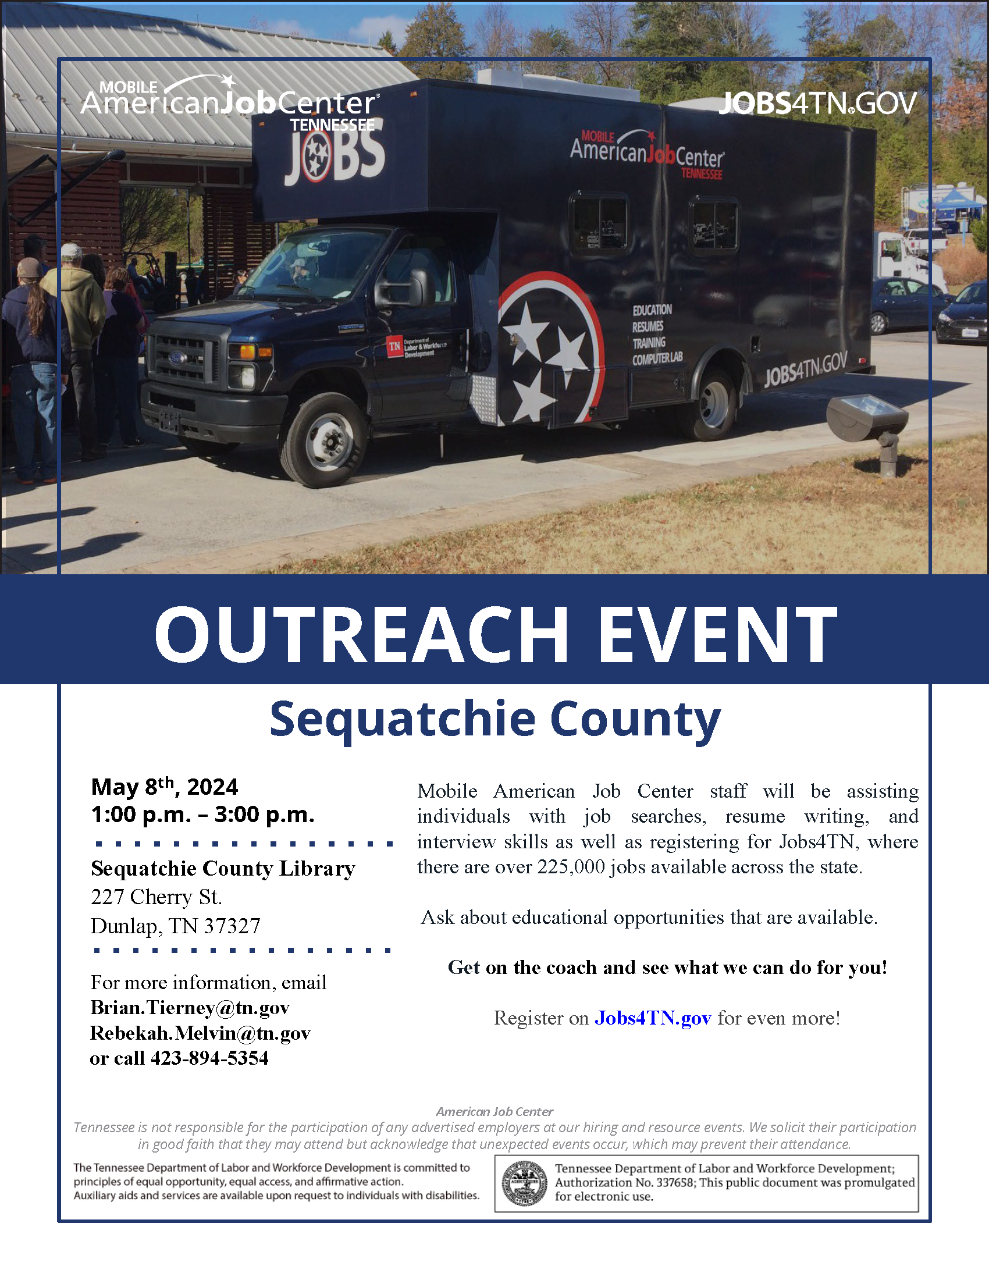 Outreach Event in Sequatchie County is May 8